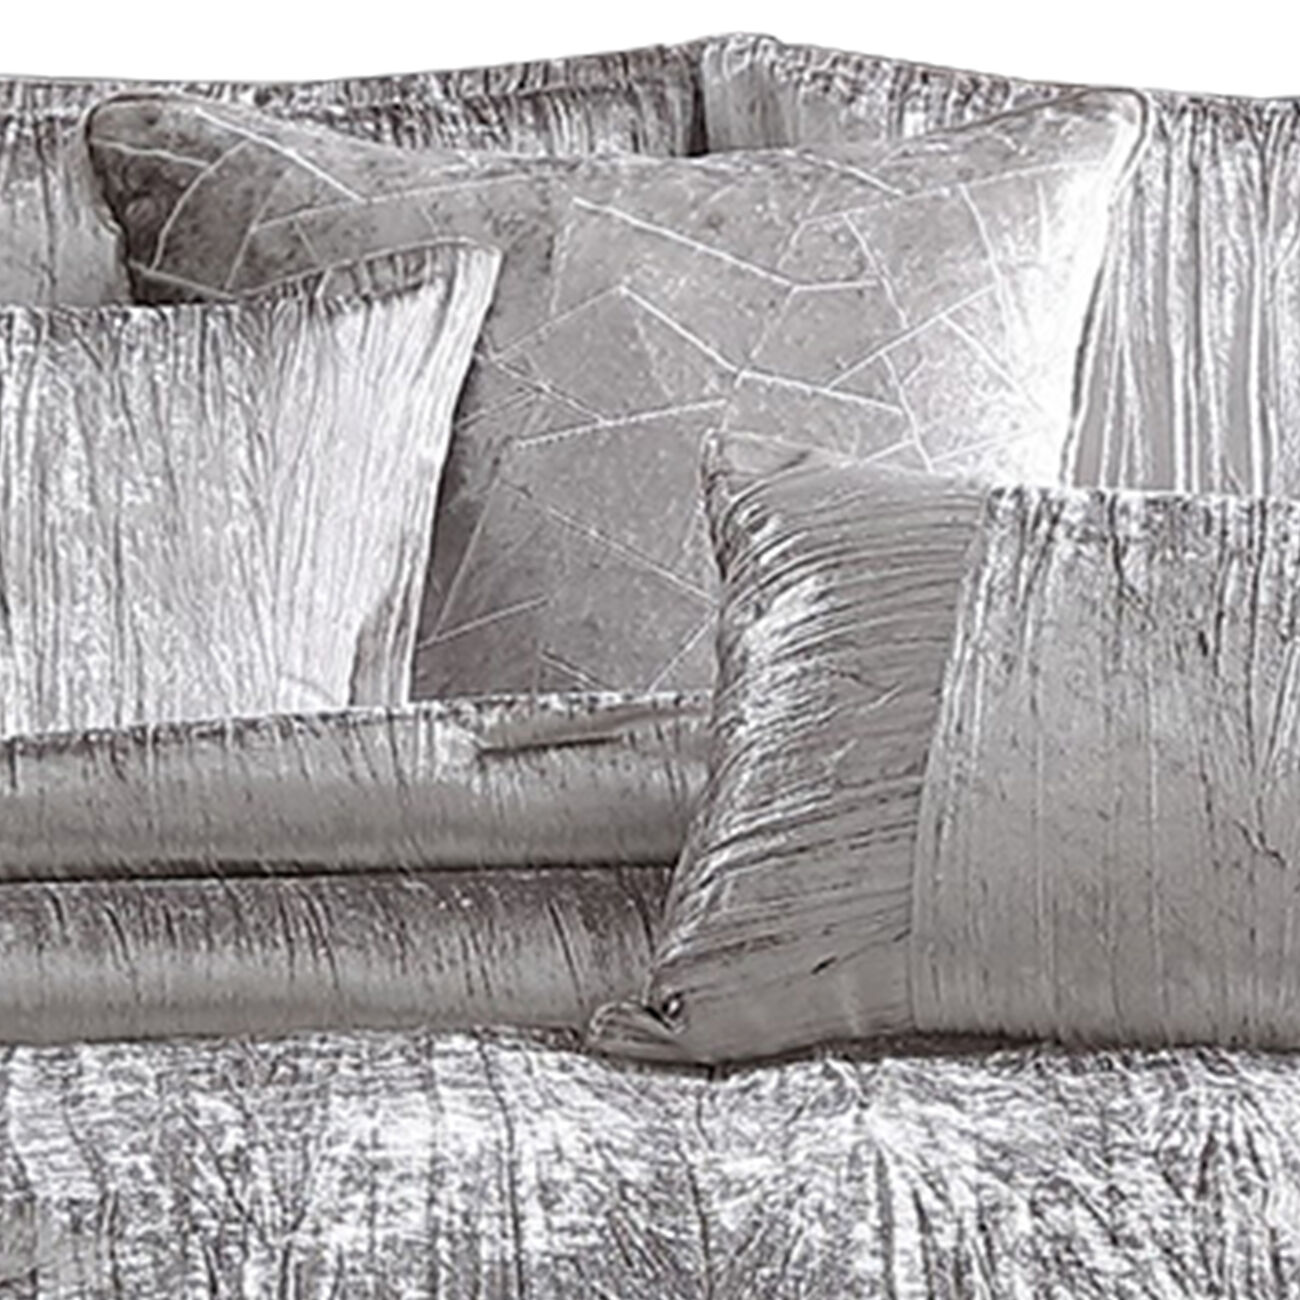 King Size 7 Piece Fabric Comforter Set with Crinkle Texture, Silver